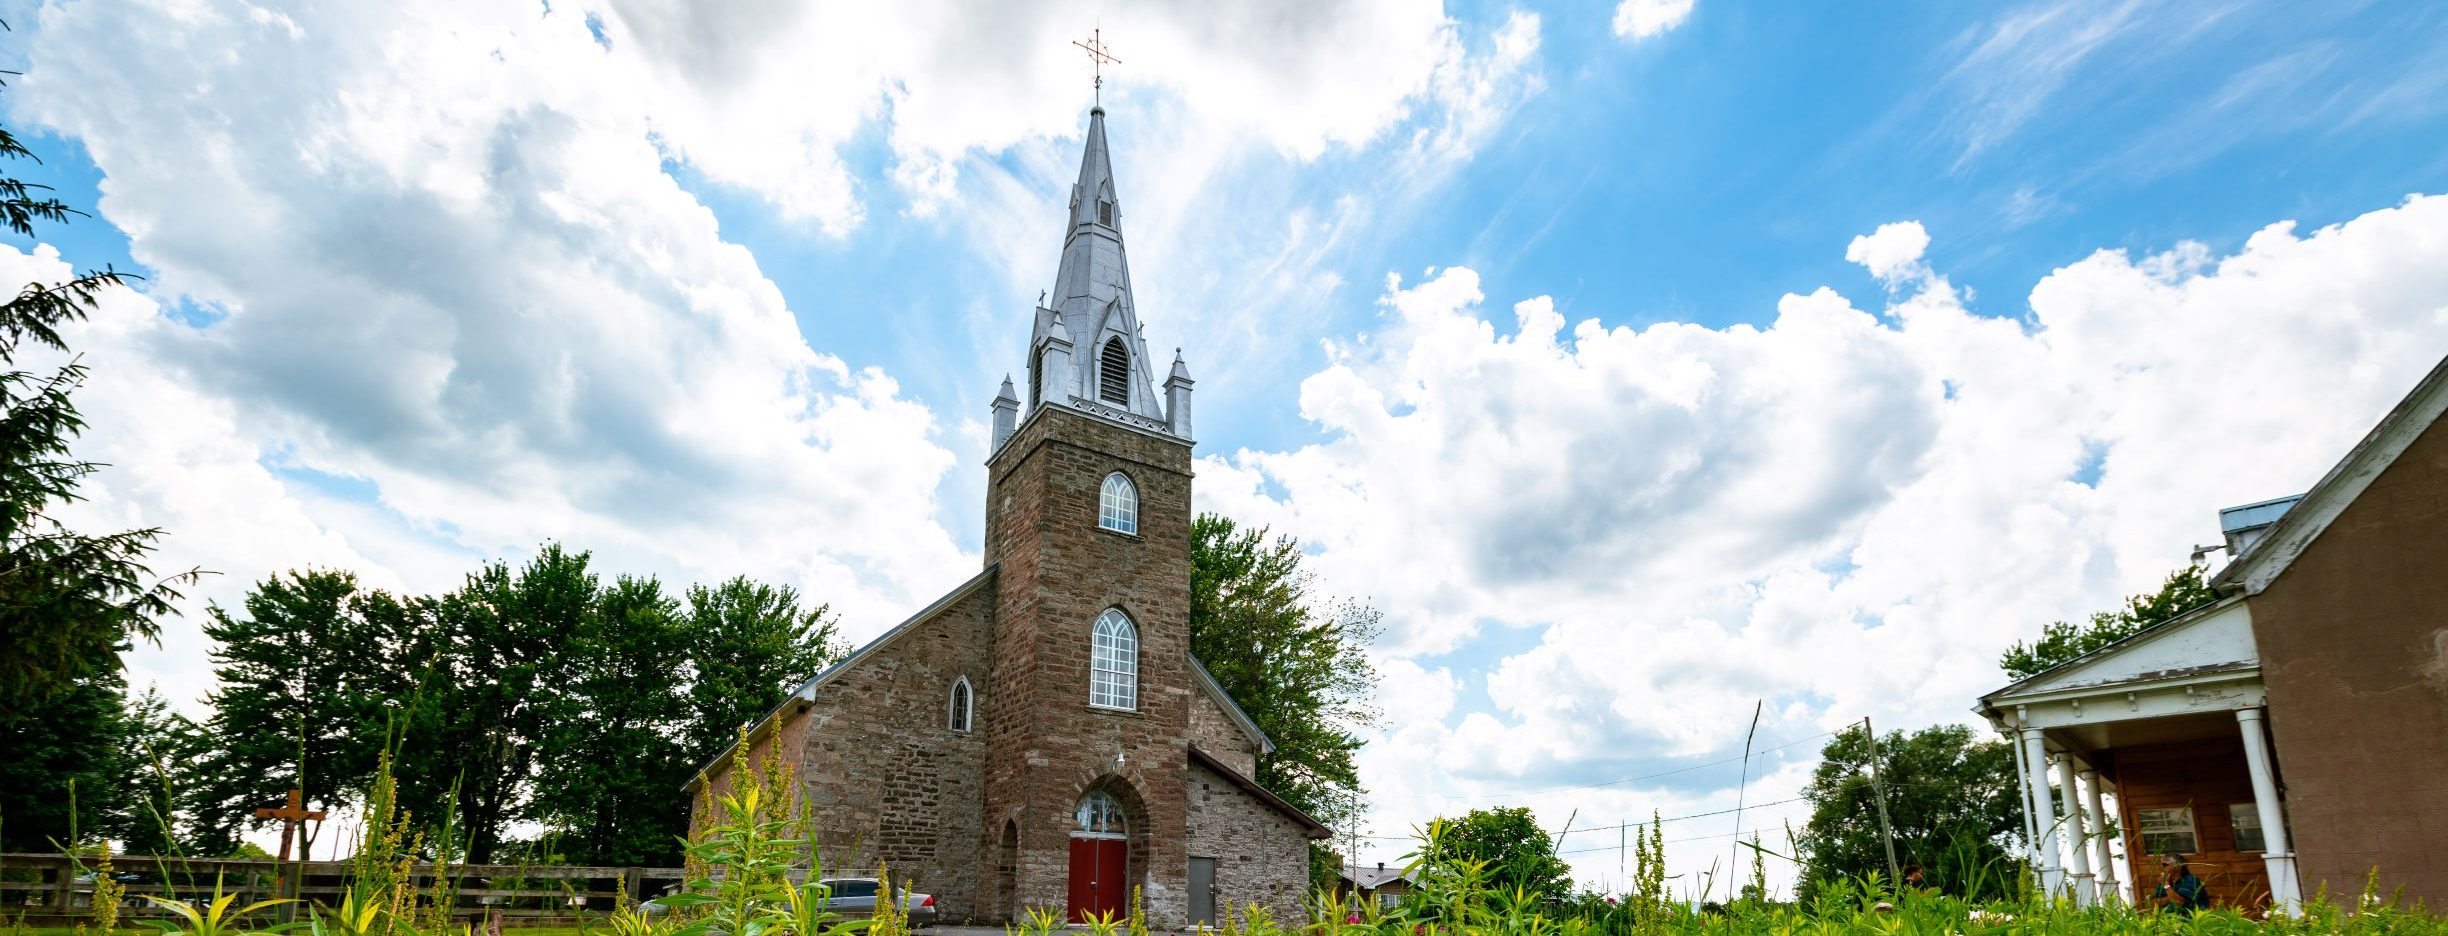 Established in the 1750s, the St. Regis Mission Catholic Church has been an iconic fixture at the confluence of the St. Lawrence and St. Regis rivers for centuries.